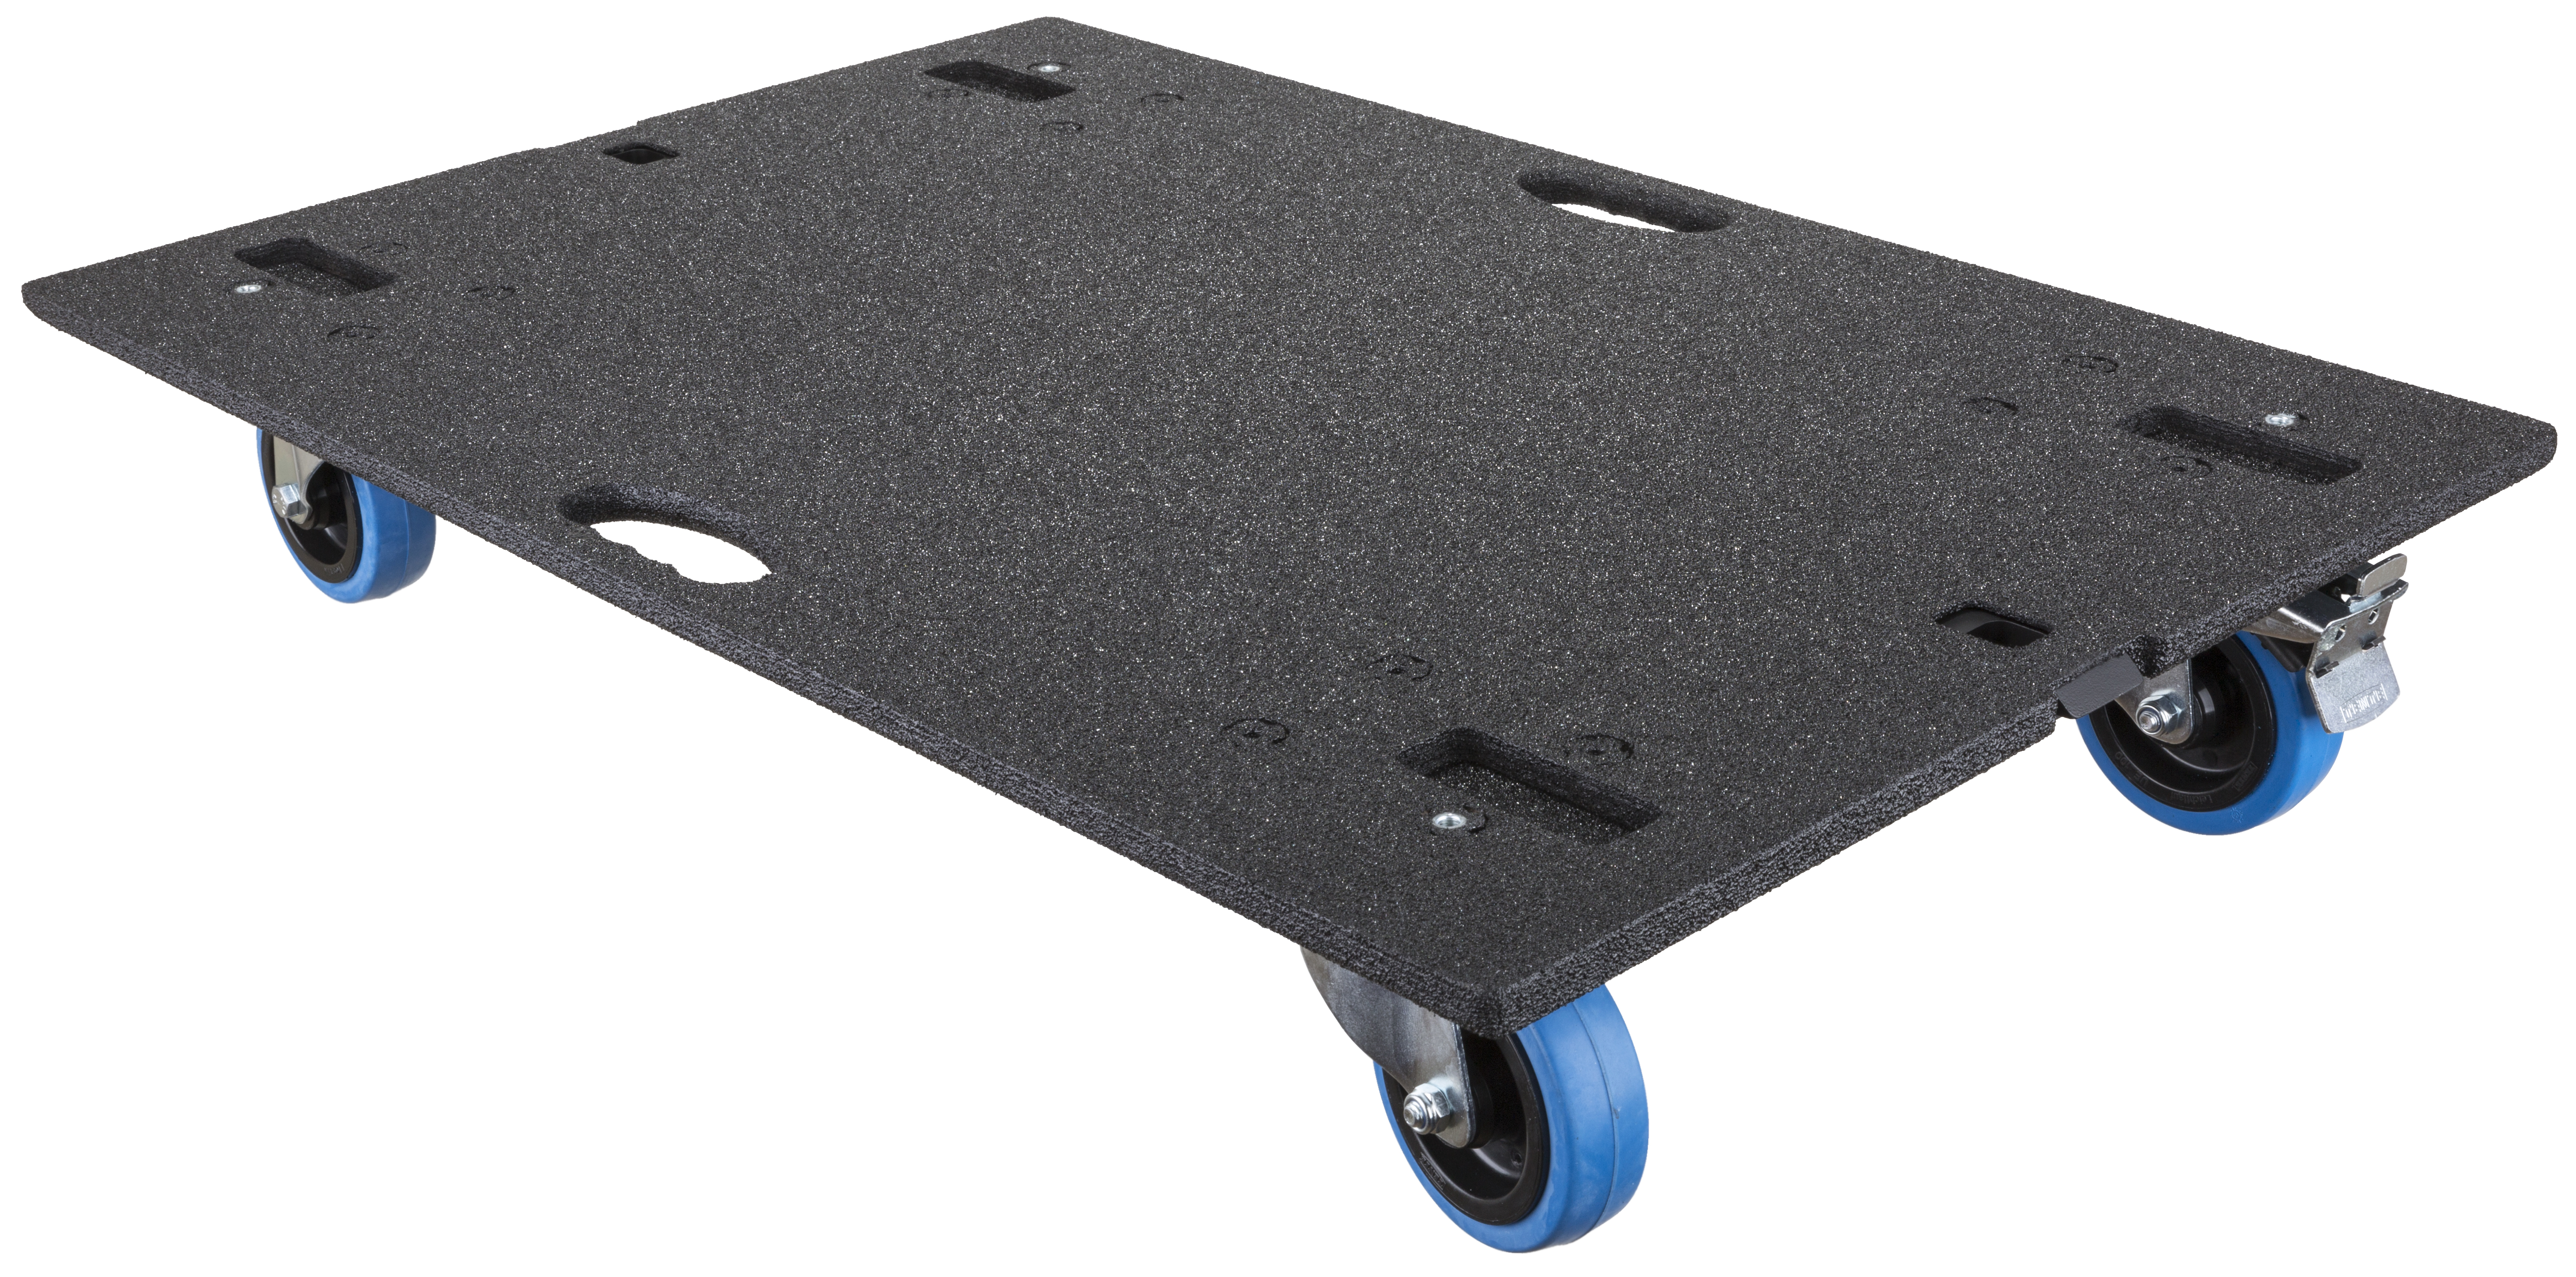 Custom-made dolly for quick and safe transport of the SQ-subwoofer.